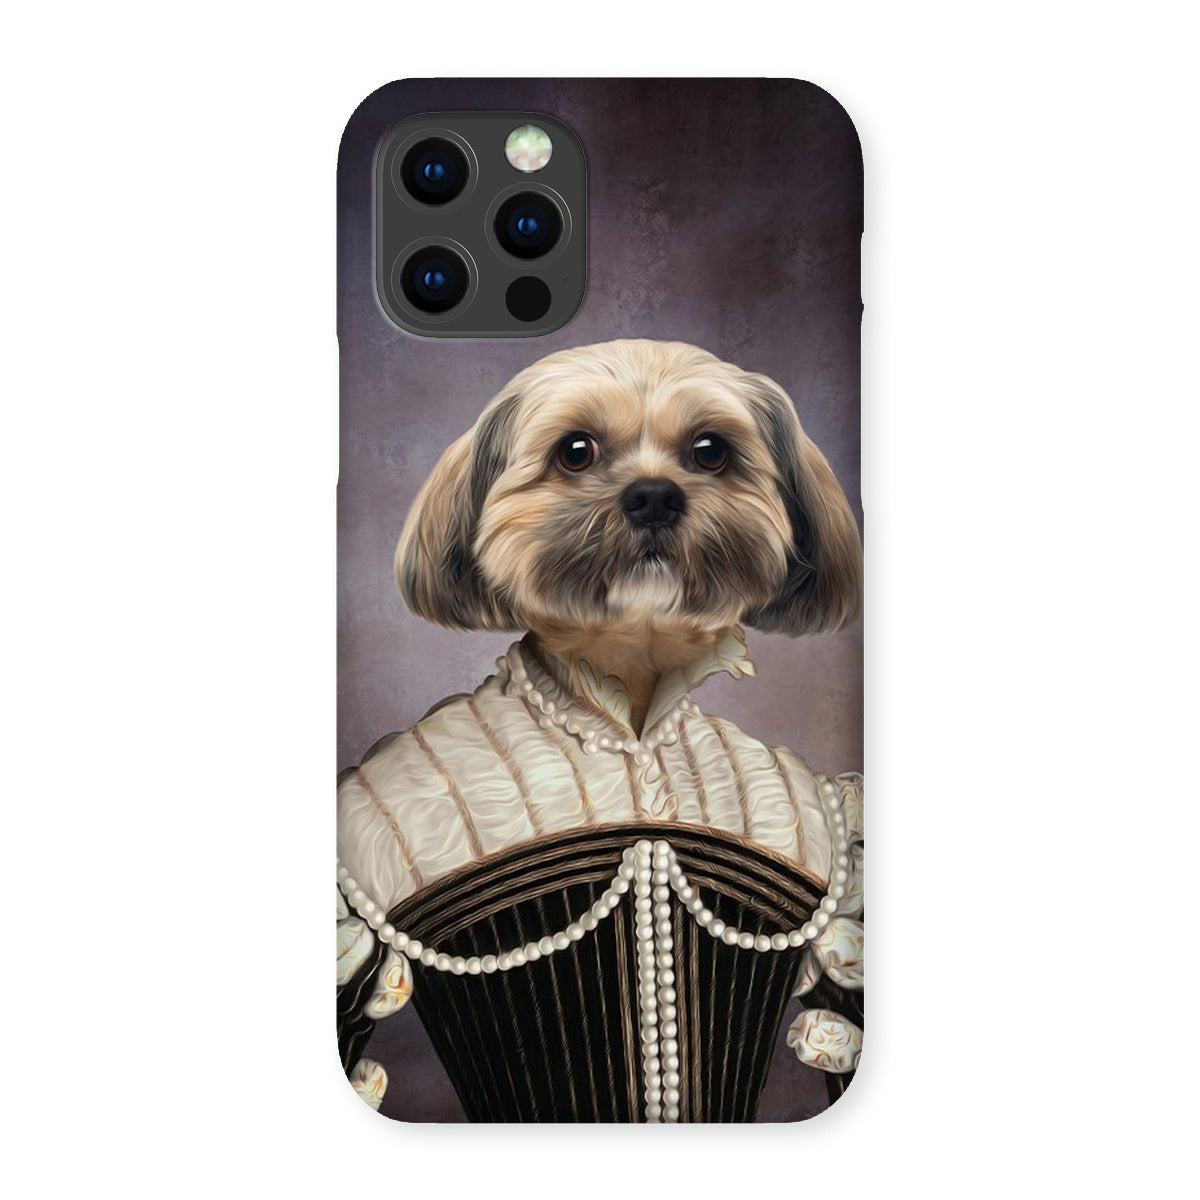 Paw & Glory, pawandglory, personalized iphone 11 case dogs, iphone 11 case dogs, custom dog phone case, personalised cat phone case, dog portrait phone case, life is better with a dog phone case, Pet Portrait phone case,